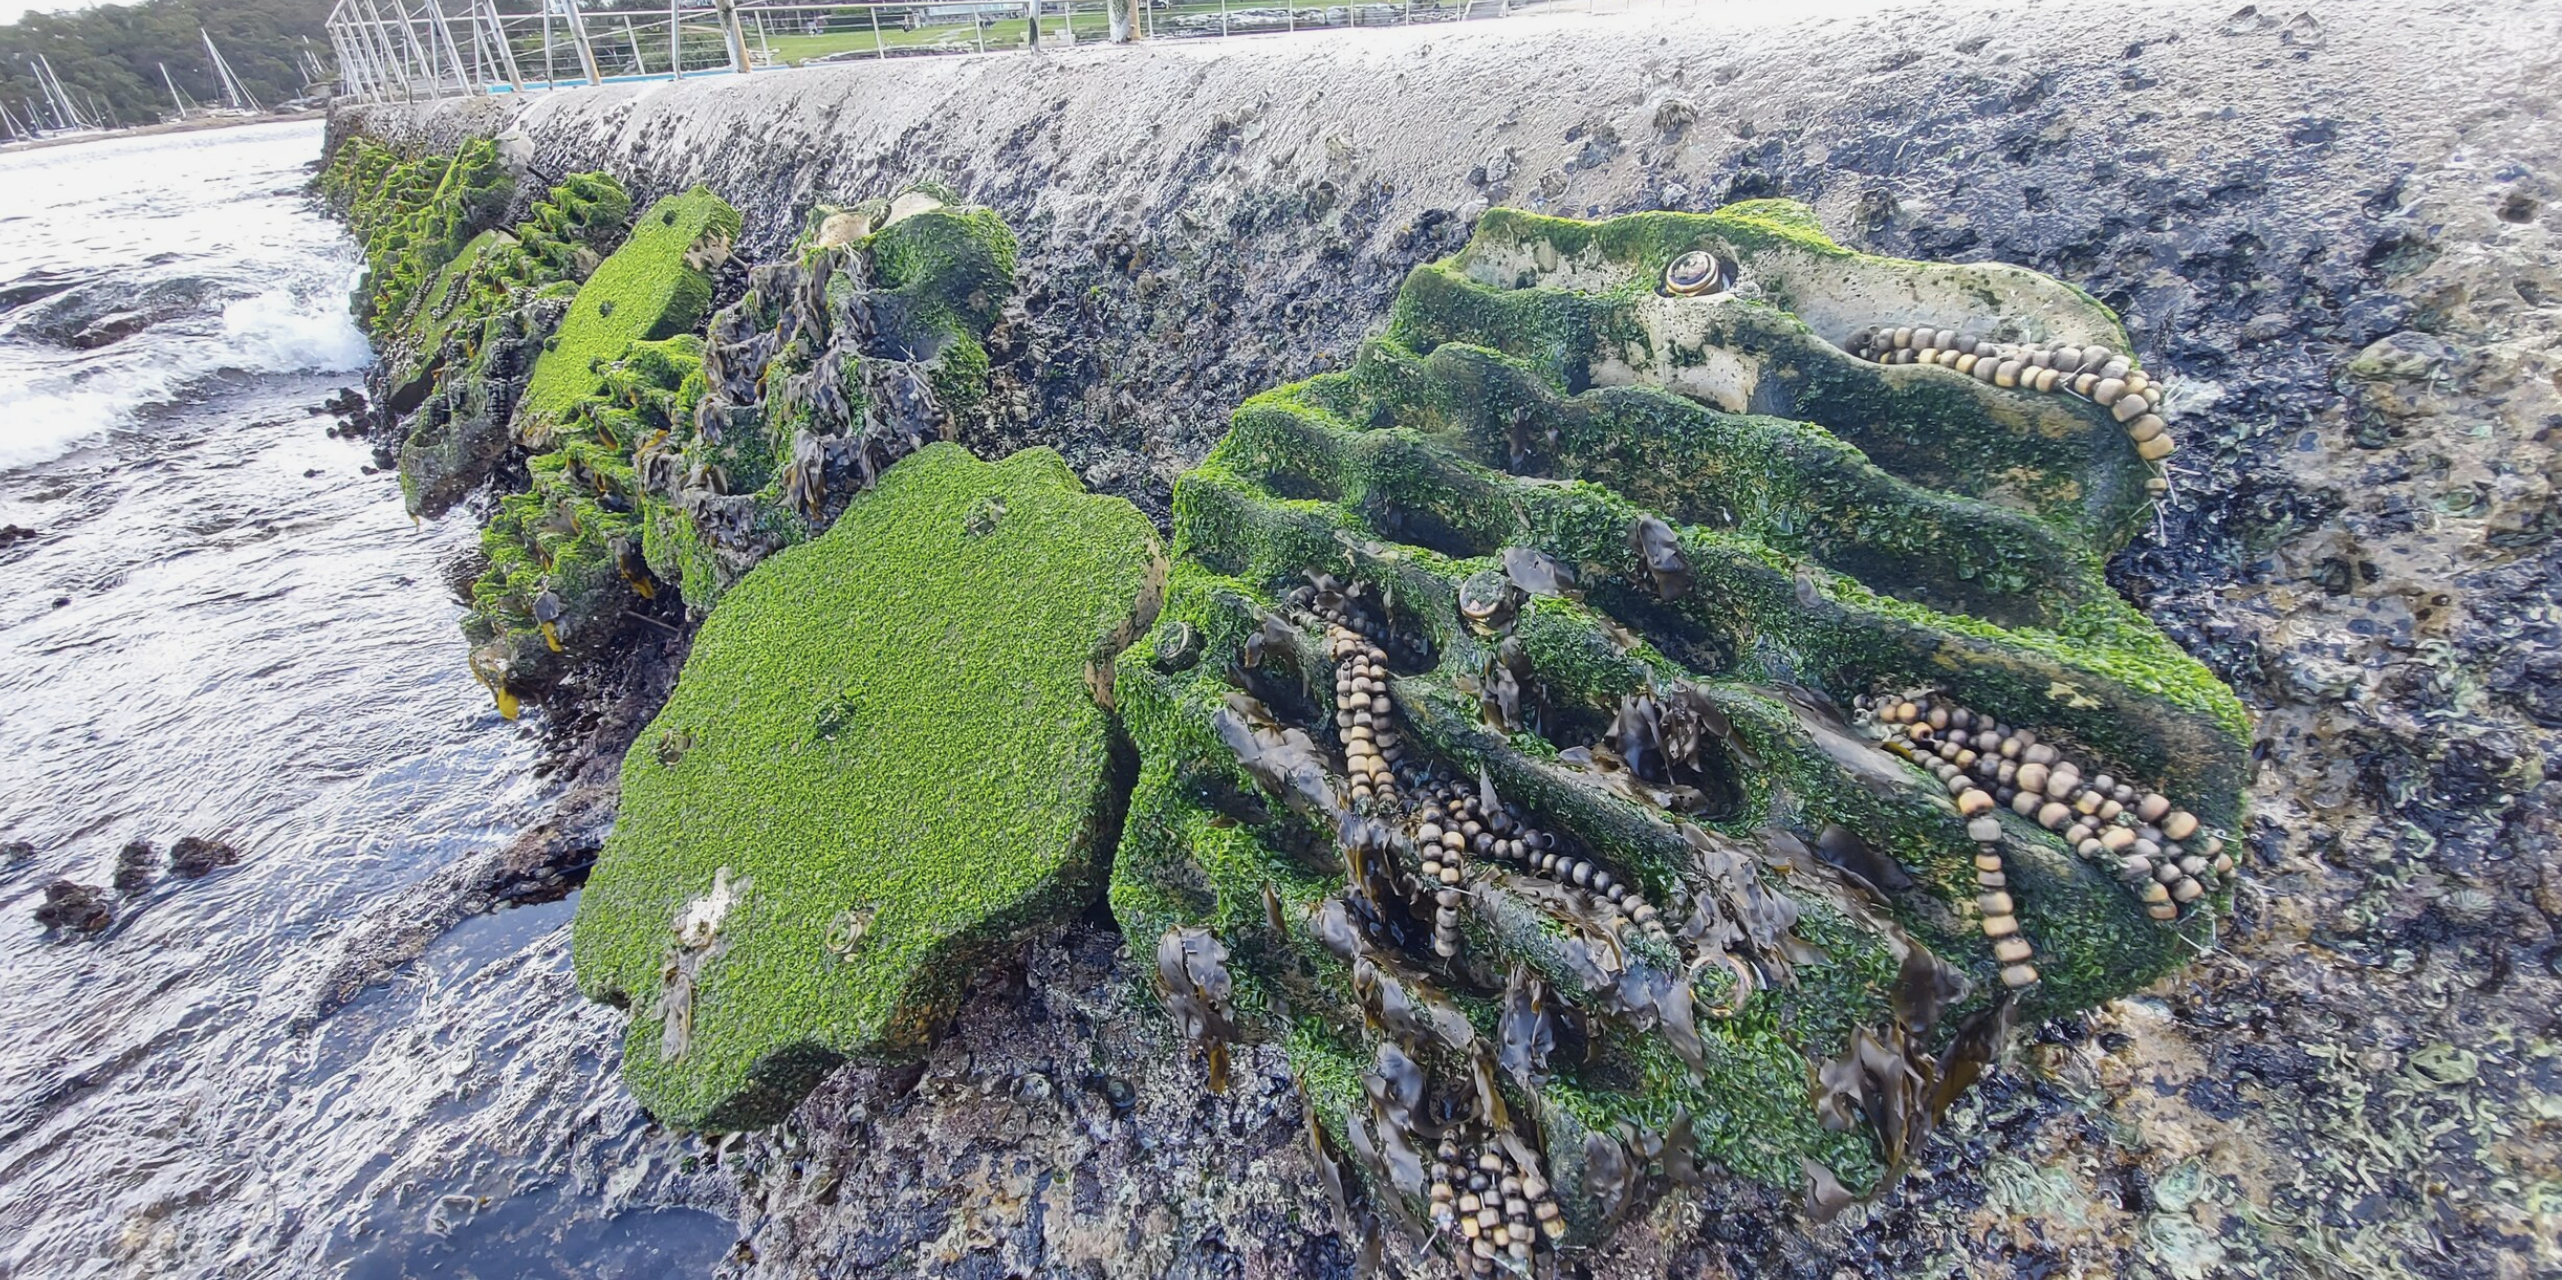 ‘LIVING SEA WALLS’ SHOW THE ABILITY TO REVIVE BIODIVERSITY